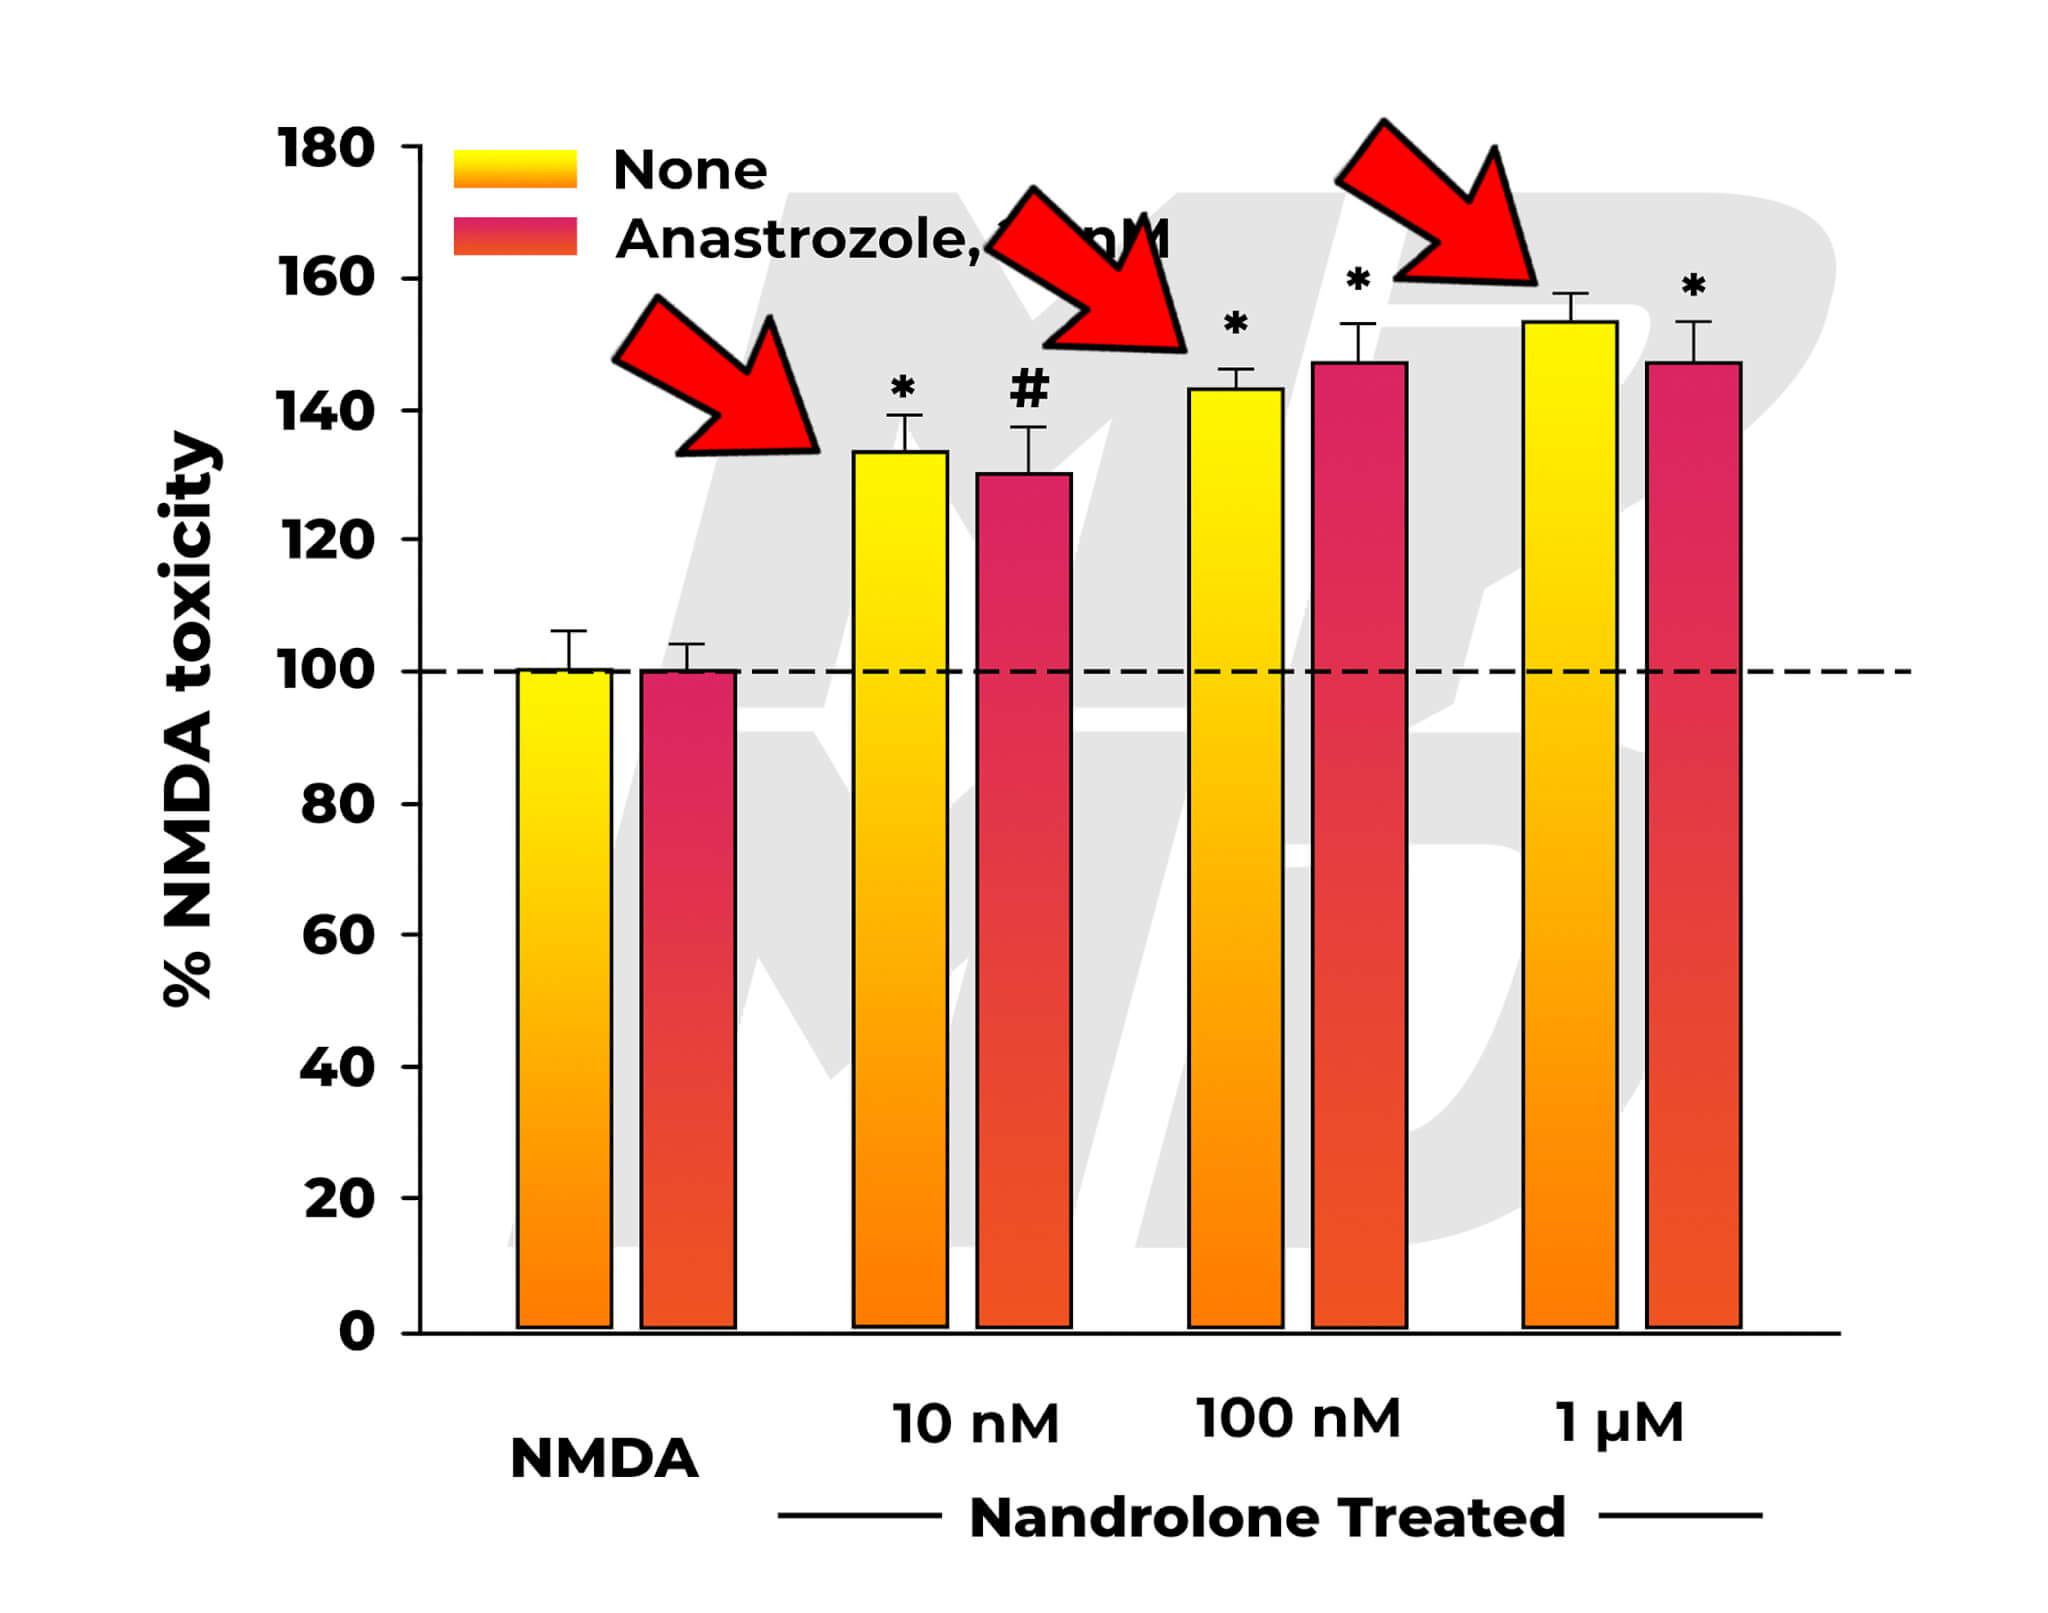 NMDA Neurotoxicity In Nandrolone (19-nortestosterone) Treated Group Co-Administered Nothing, Or The Aromatase Inhibitor Arimidex (Anastrozole) - Neurotoxicity With And Without Arimidex Pointed Out